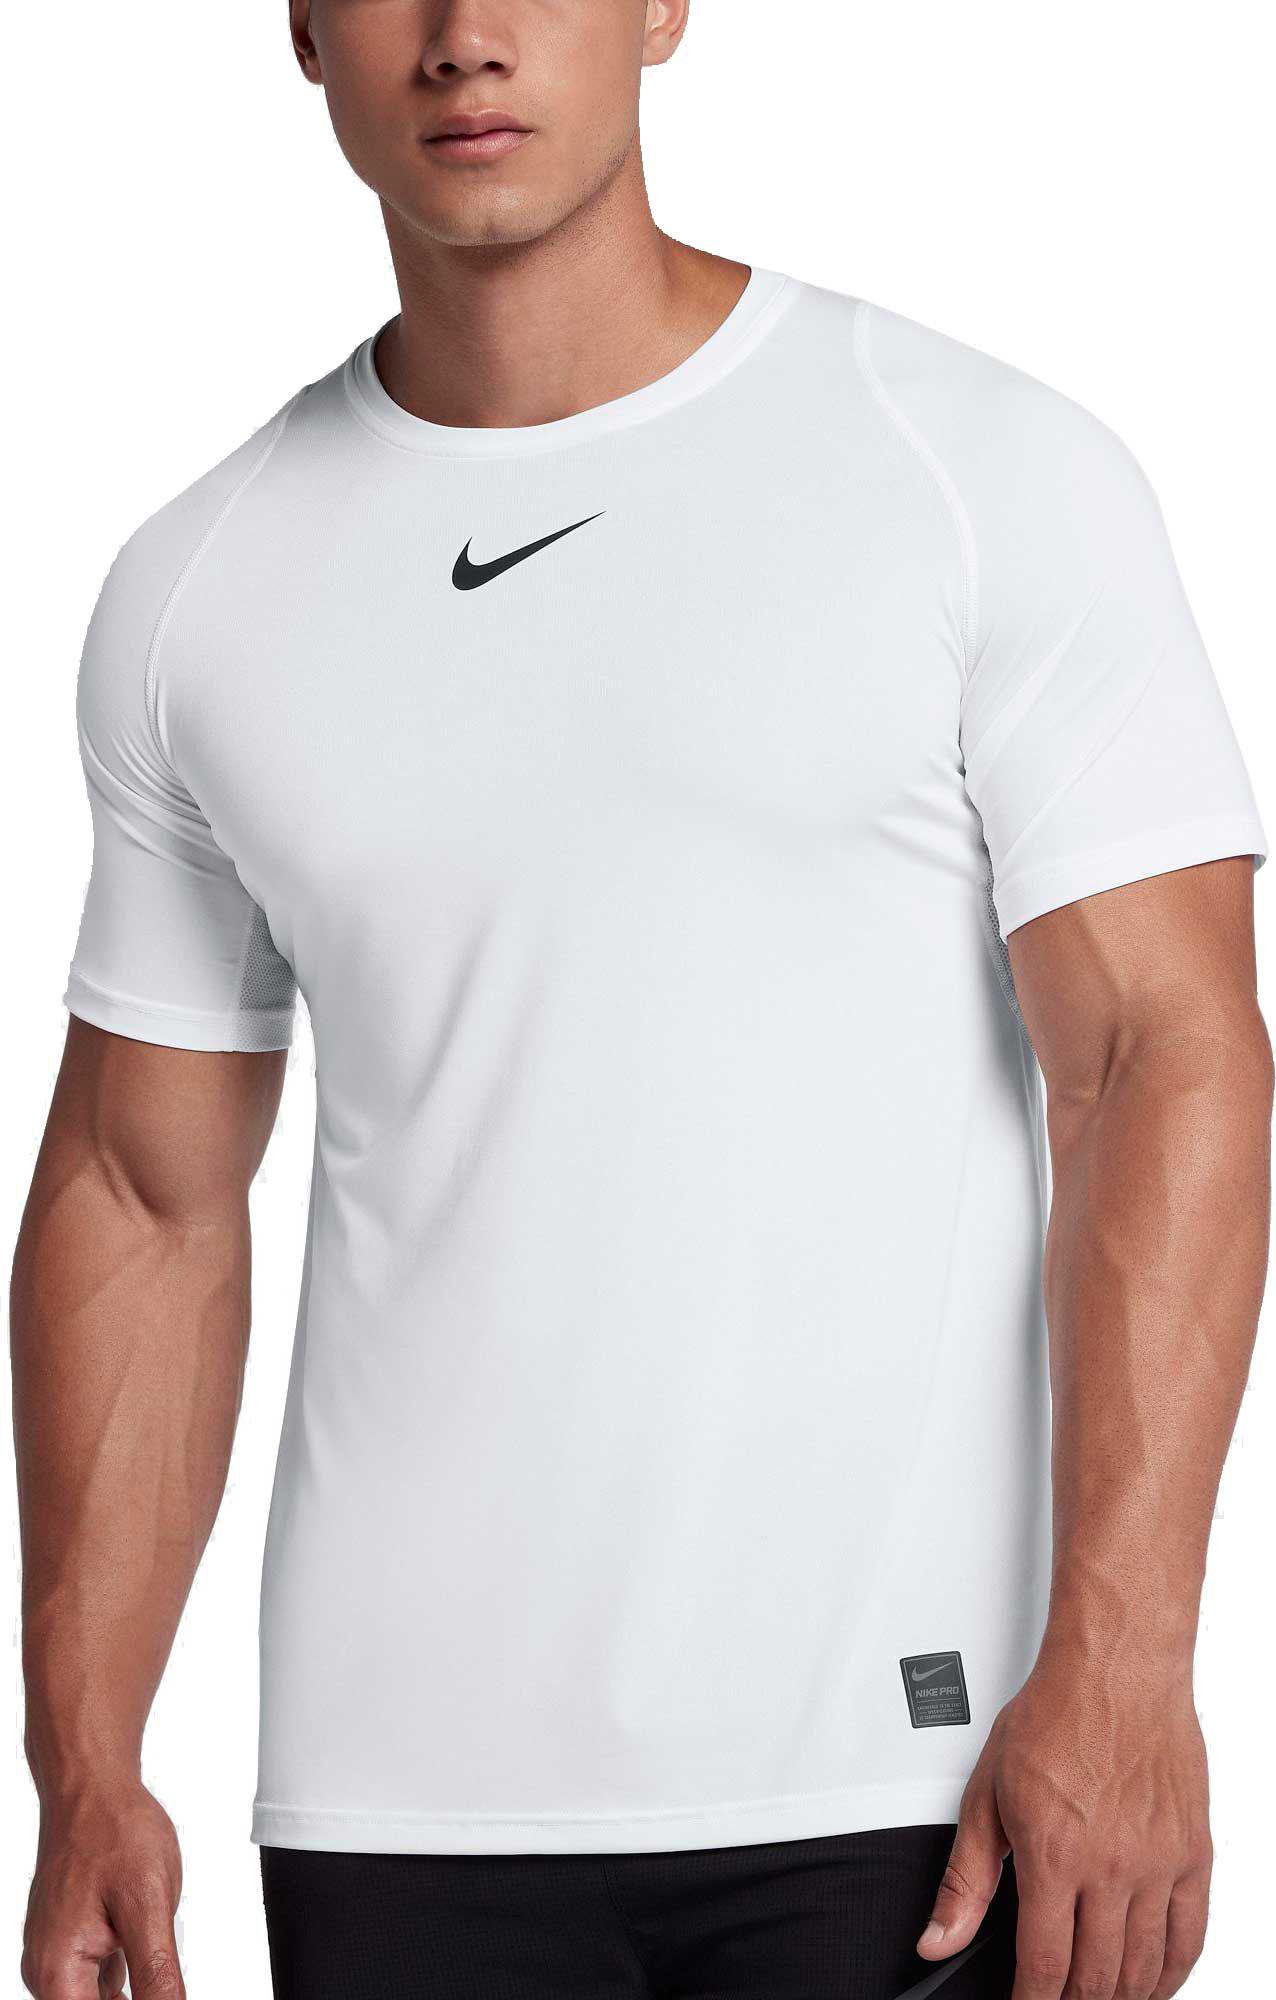 Nike Synthetic Pro Fitted T-shirt in White/Black/Black (White) for Men ...